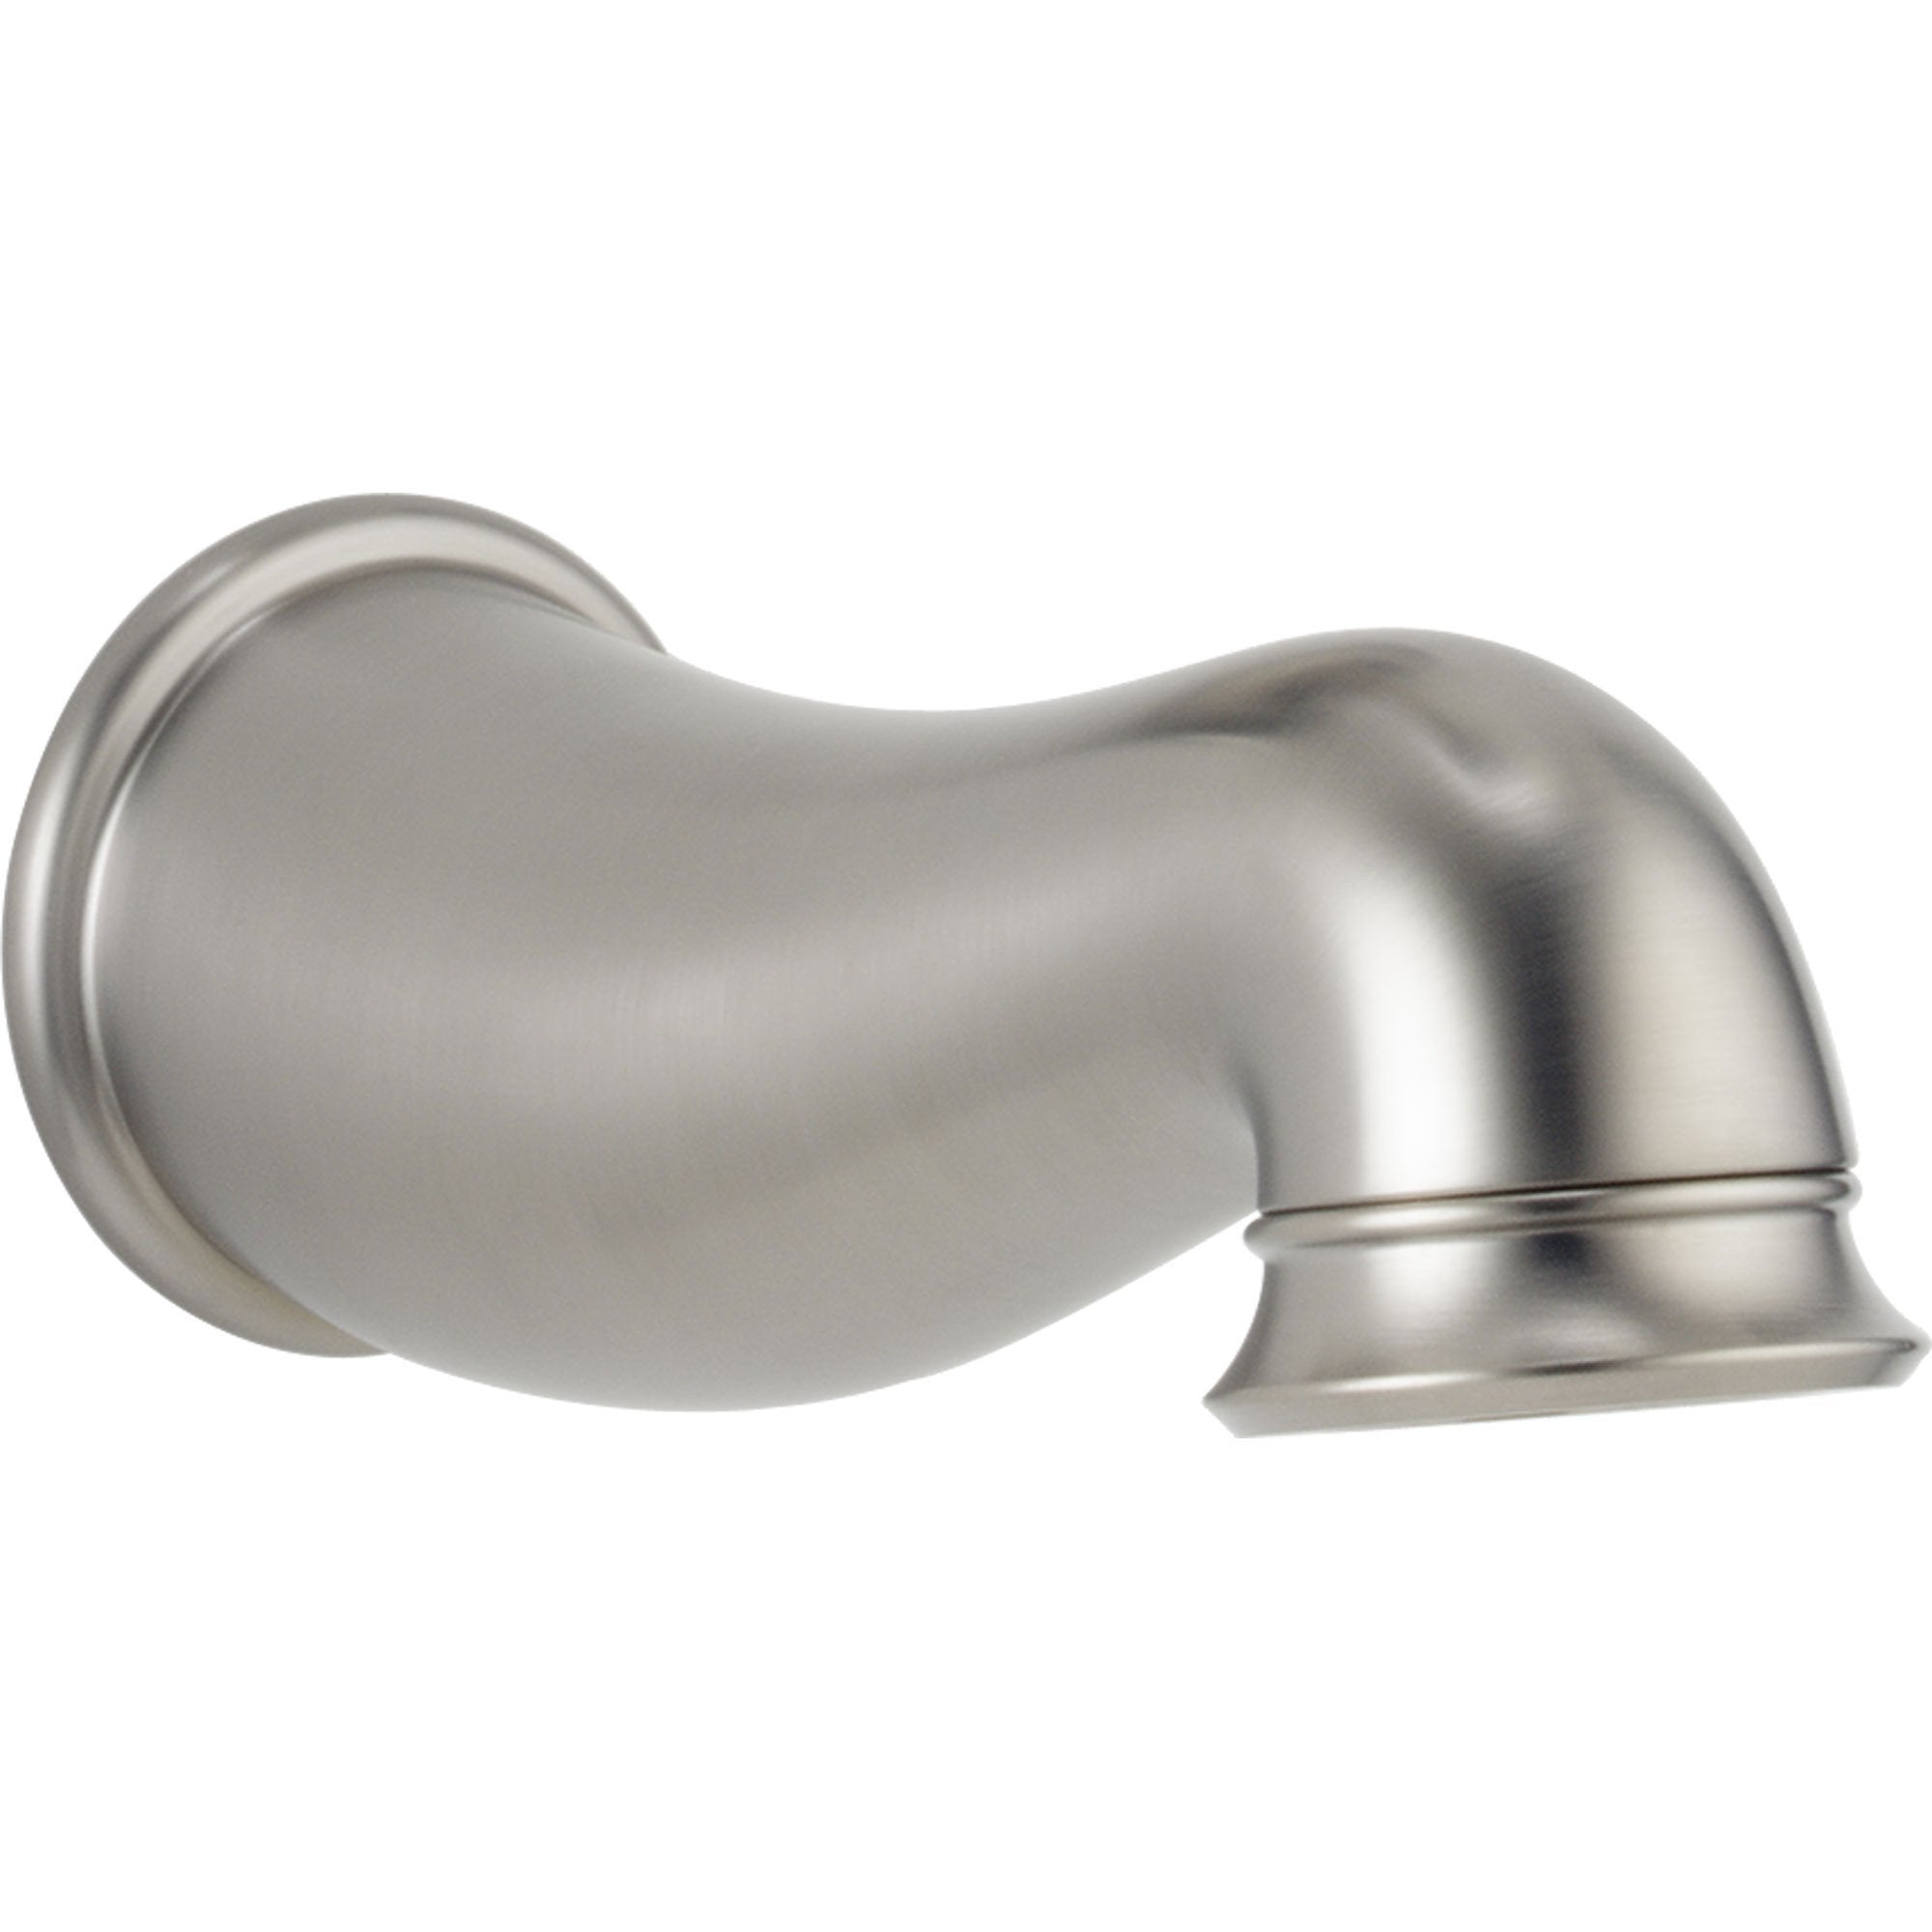 Delta Lockwood Non-Diverter Tub Spout in Stainless Steel Finish 652677